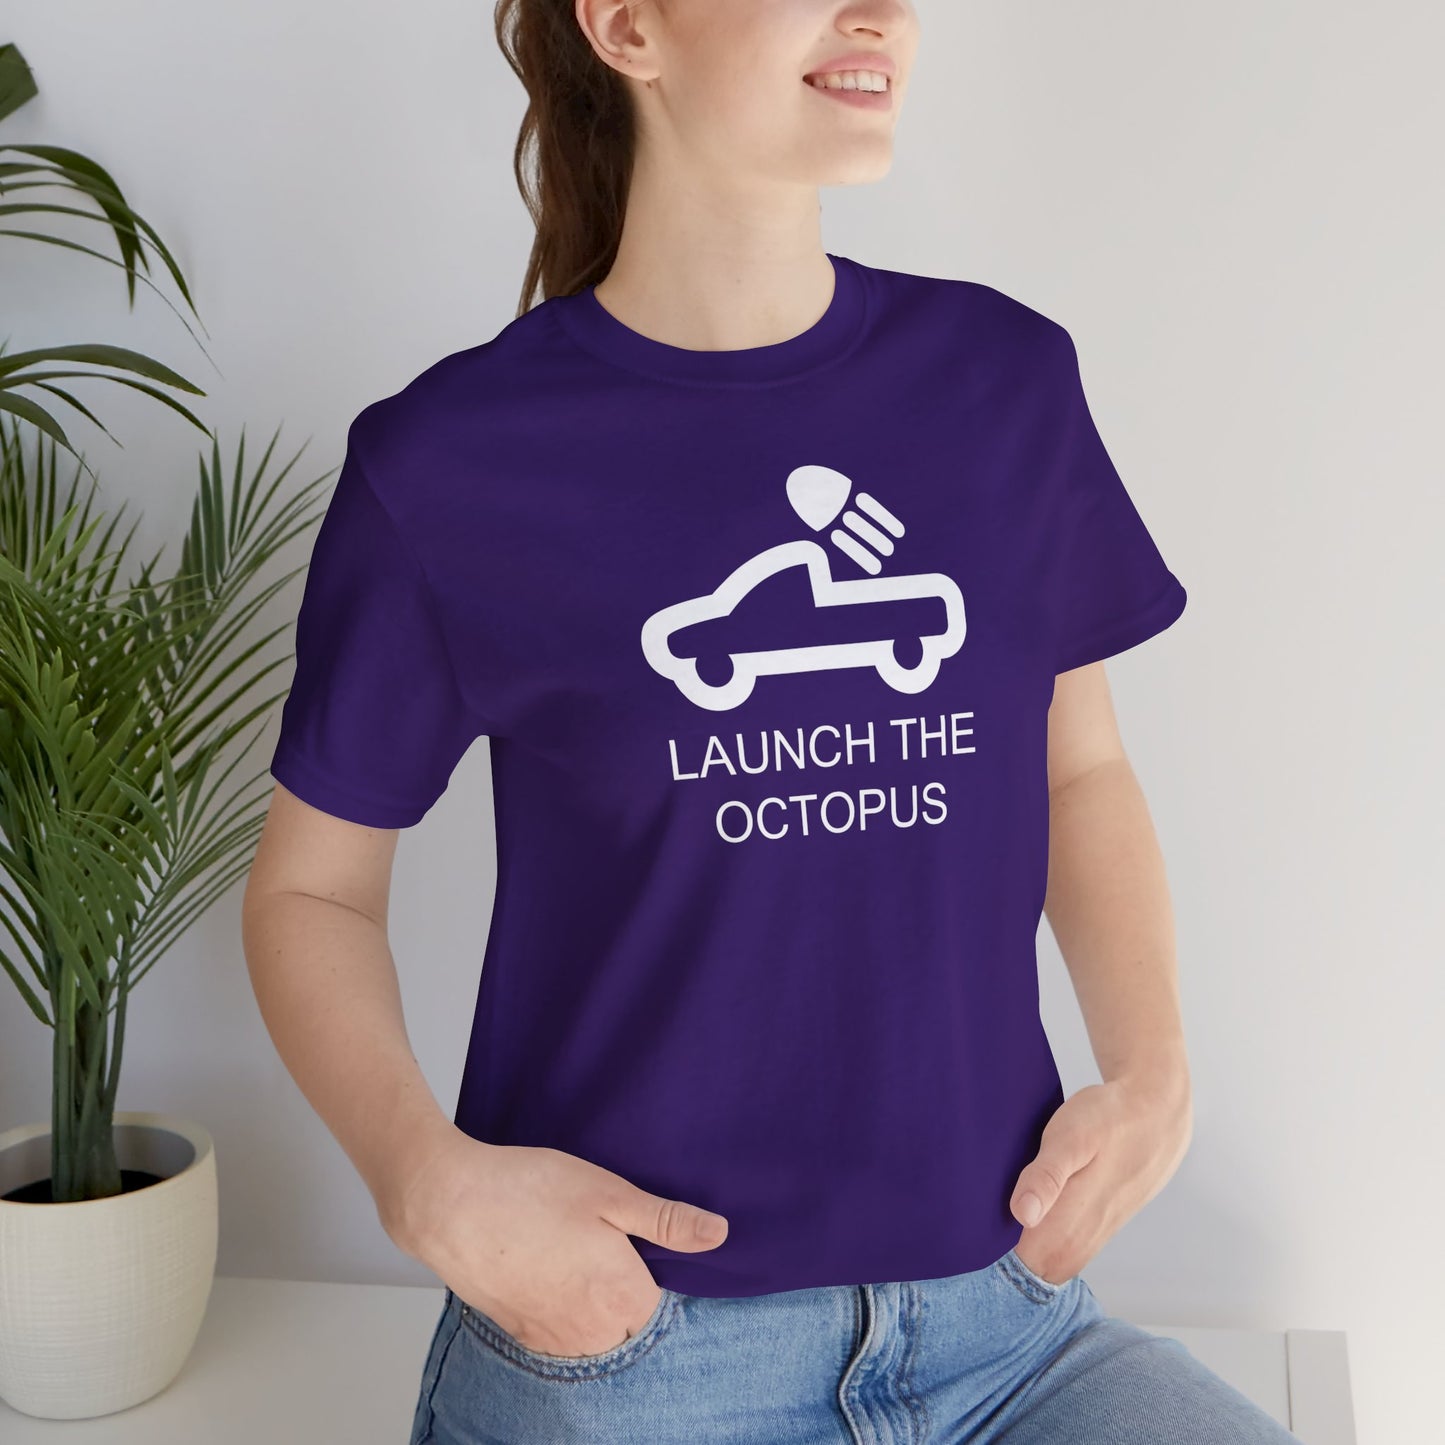 Launch the Octopus: UX T-Shirt